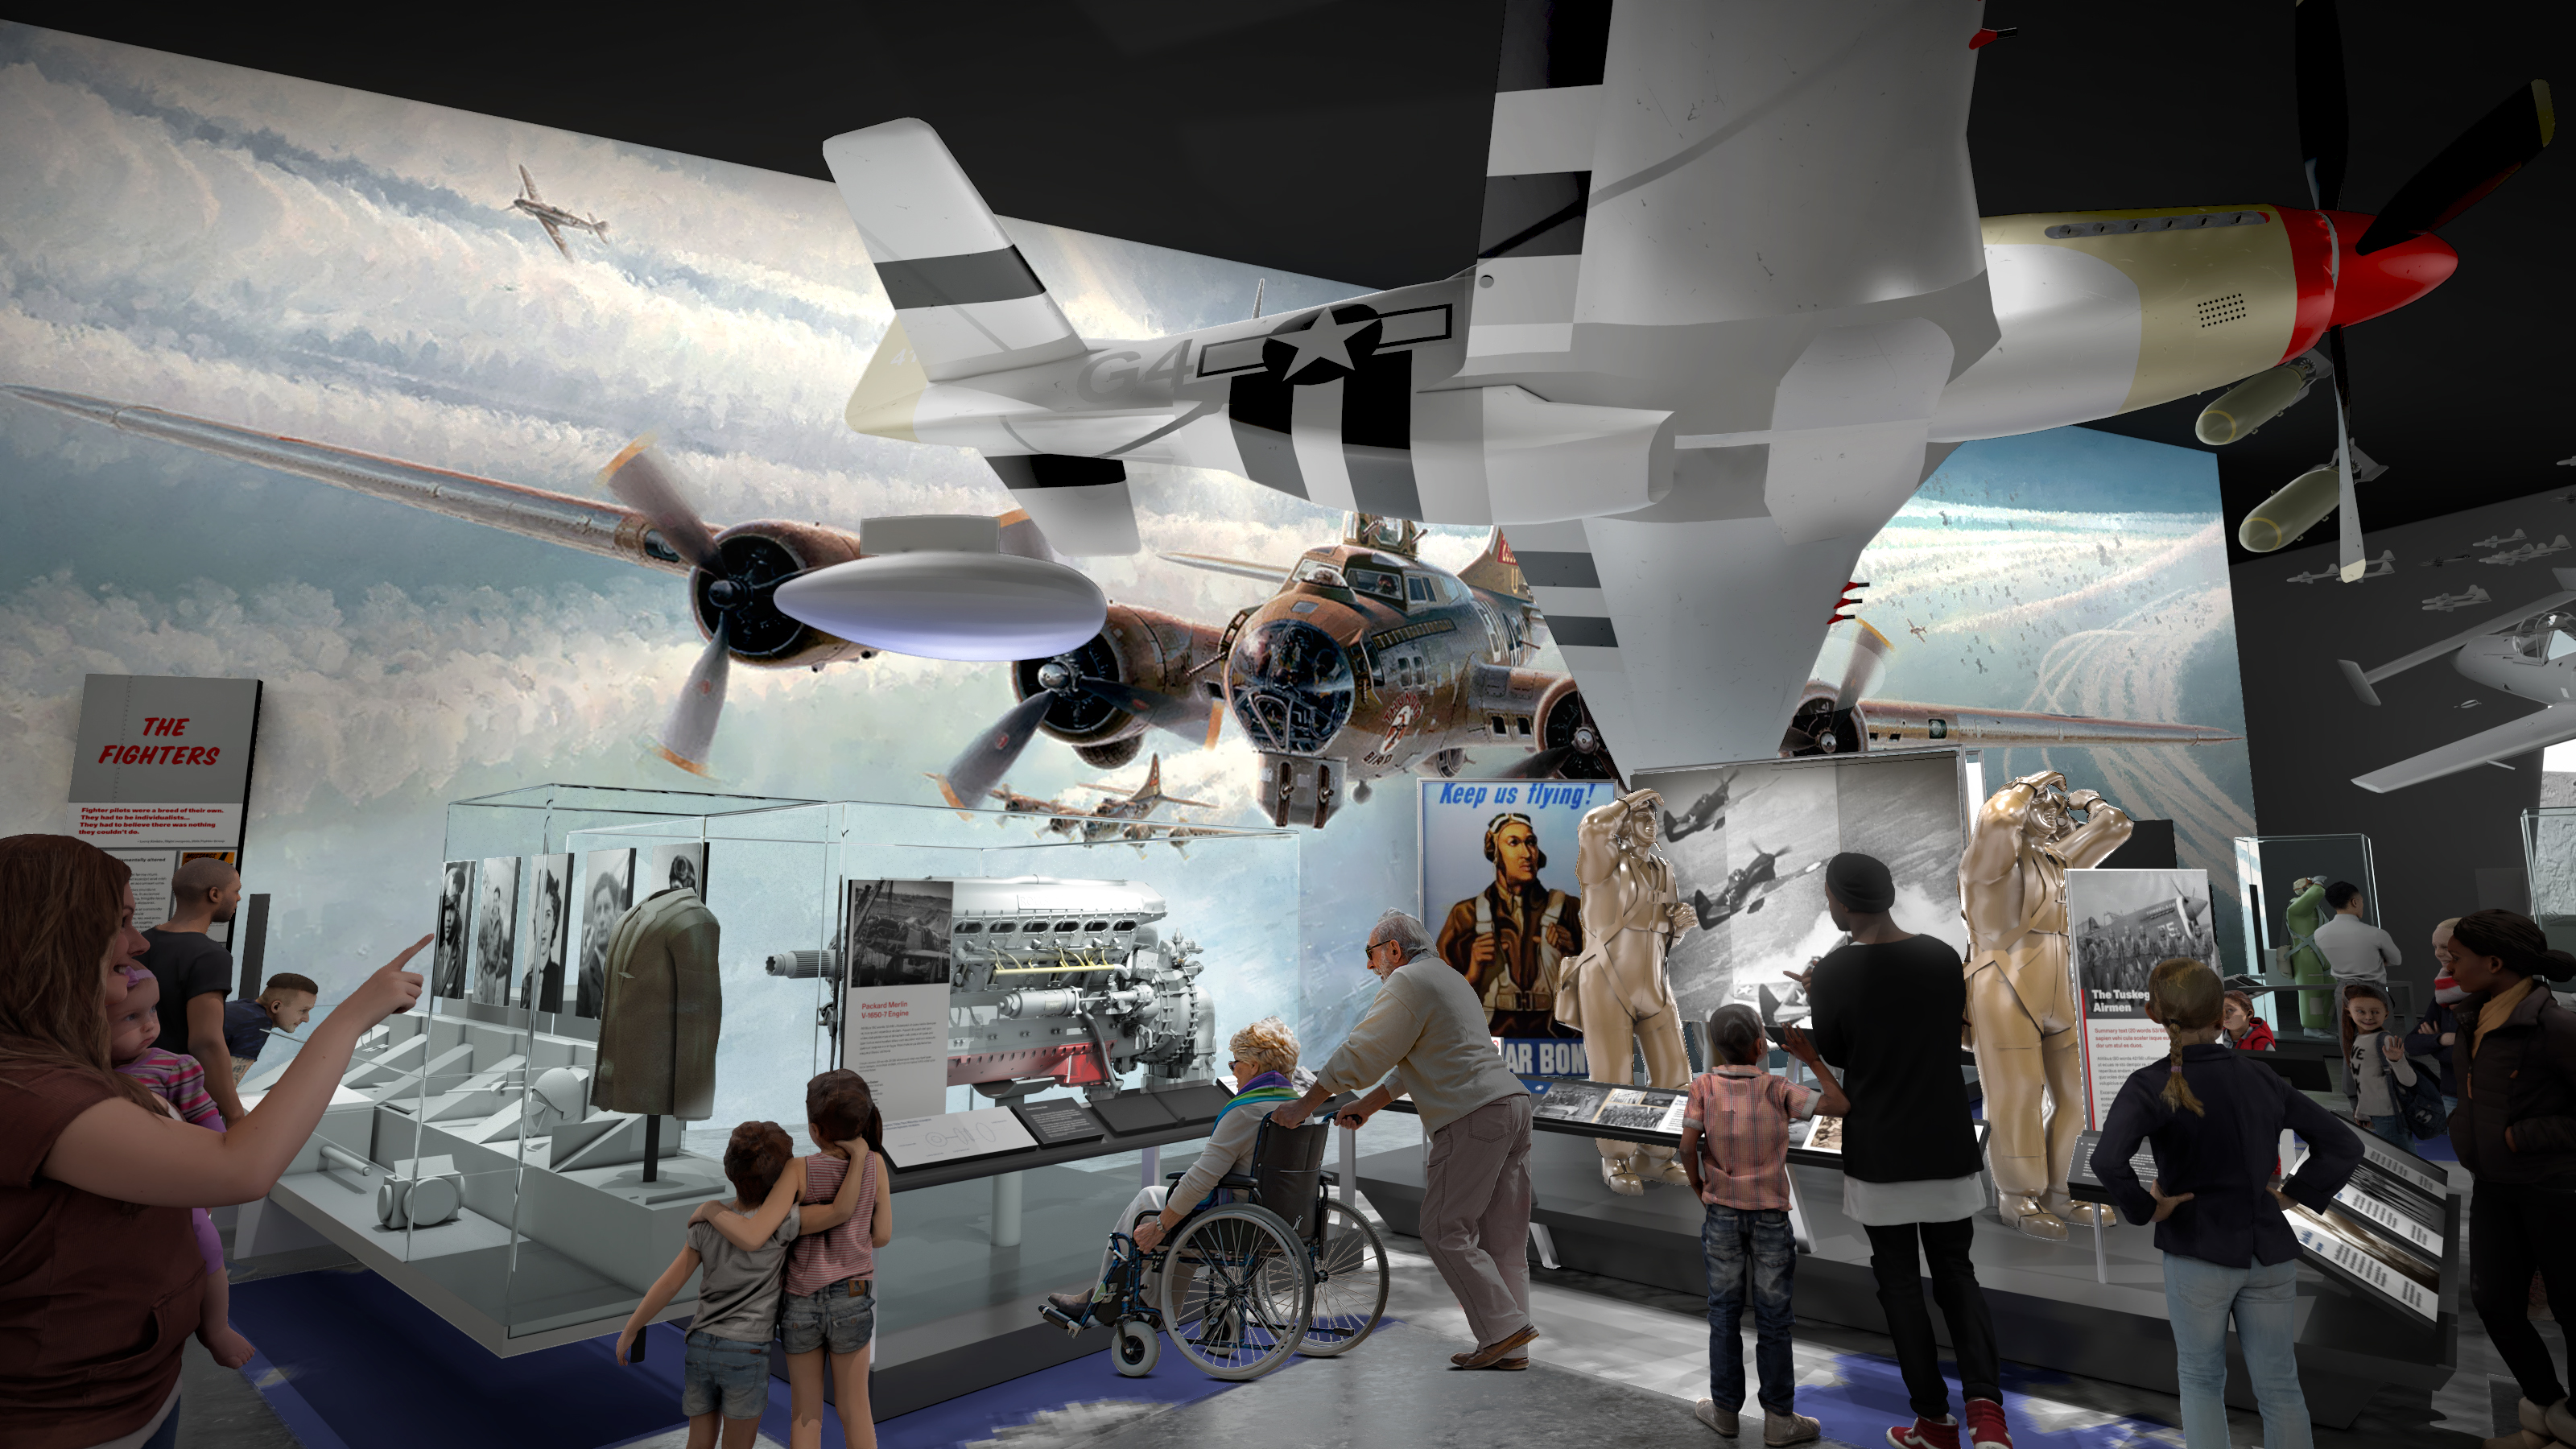 A rendering of an exhibition featuring information about the Tuskegee Airmen.